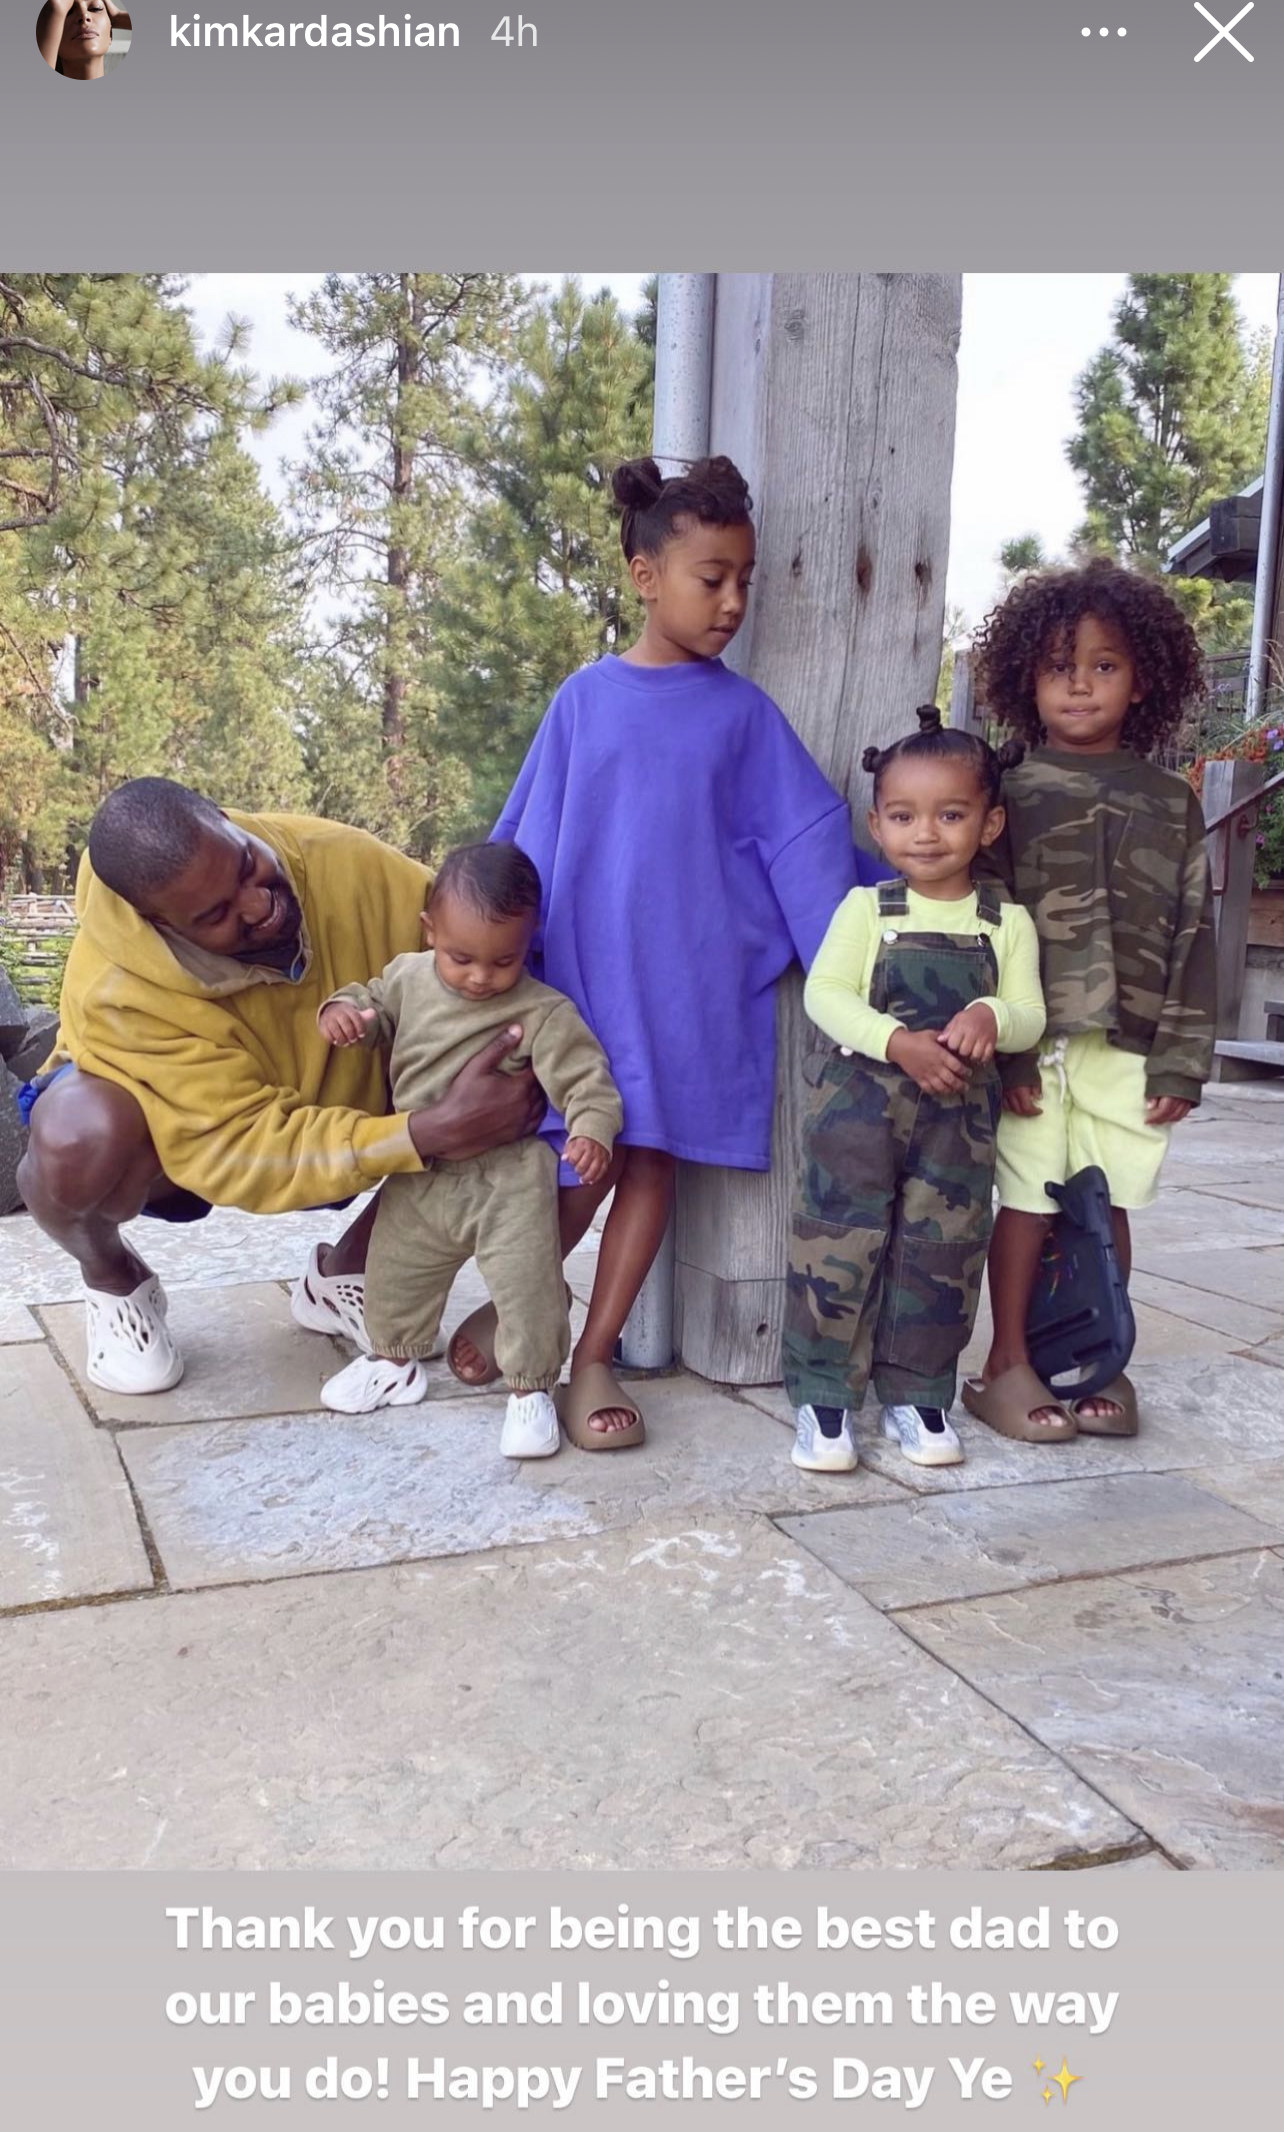 Kim Kardashian&#x27;s Father&#x27;s Day post reads: &quot;Thank you for being the best dad to our babies and loving them the way you do! Happy Father&#x27;s Day Ye&quot;